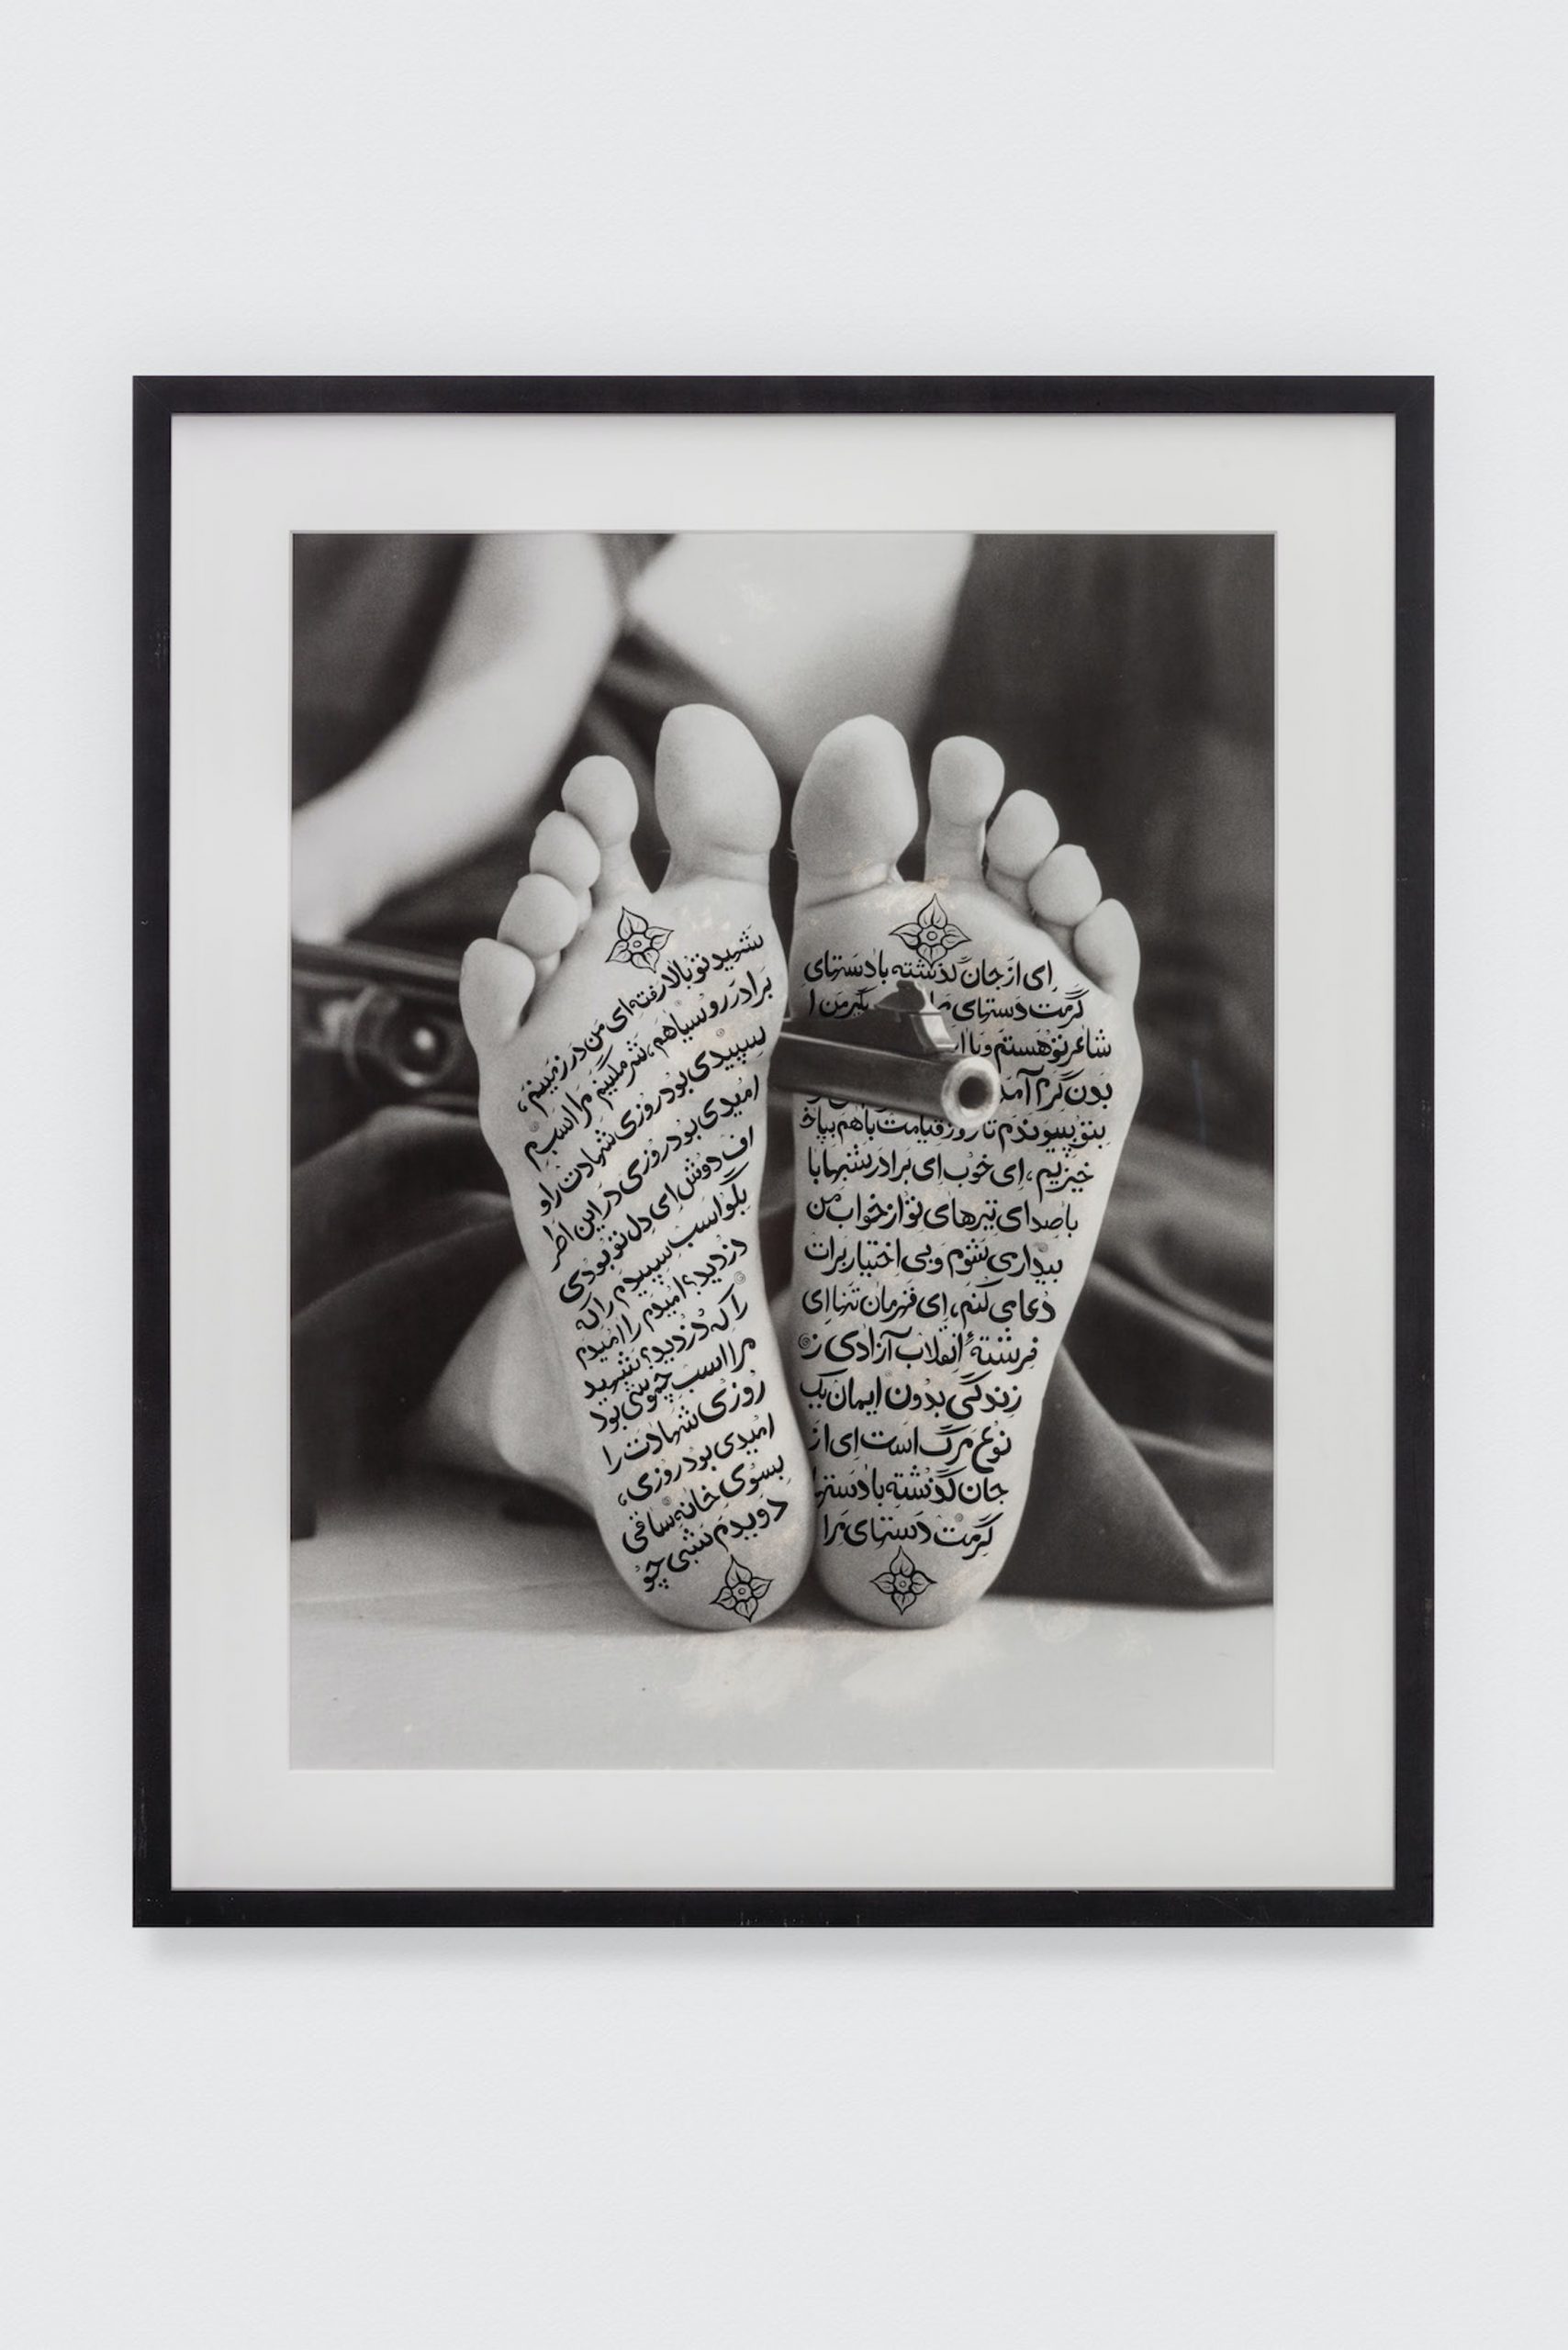 Shirin Neshat. Allegiance with Wakefulness, 1994. Black & white photograph with ink. 48 x 39 1/4 in. © Shirin Neshat. Courtesy of the artist and Gladstone Gallery, New York. The Eileen Harris Norton Collection. Photo: Charles White.